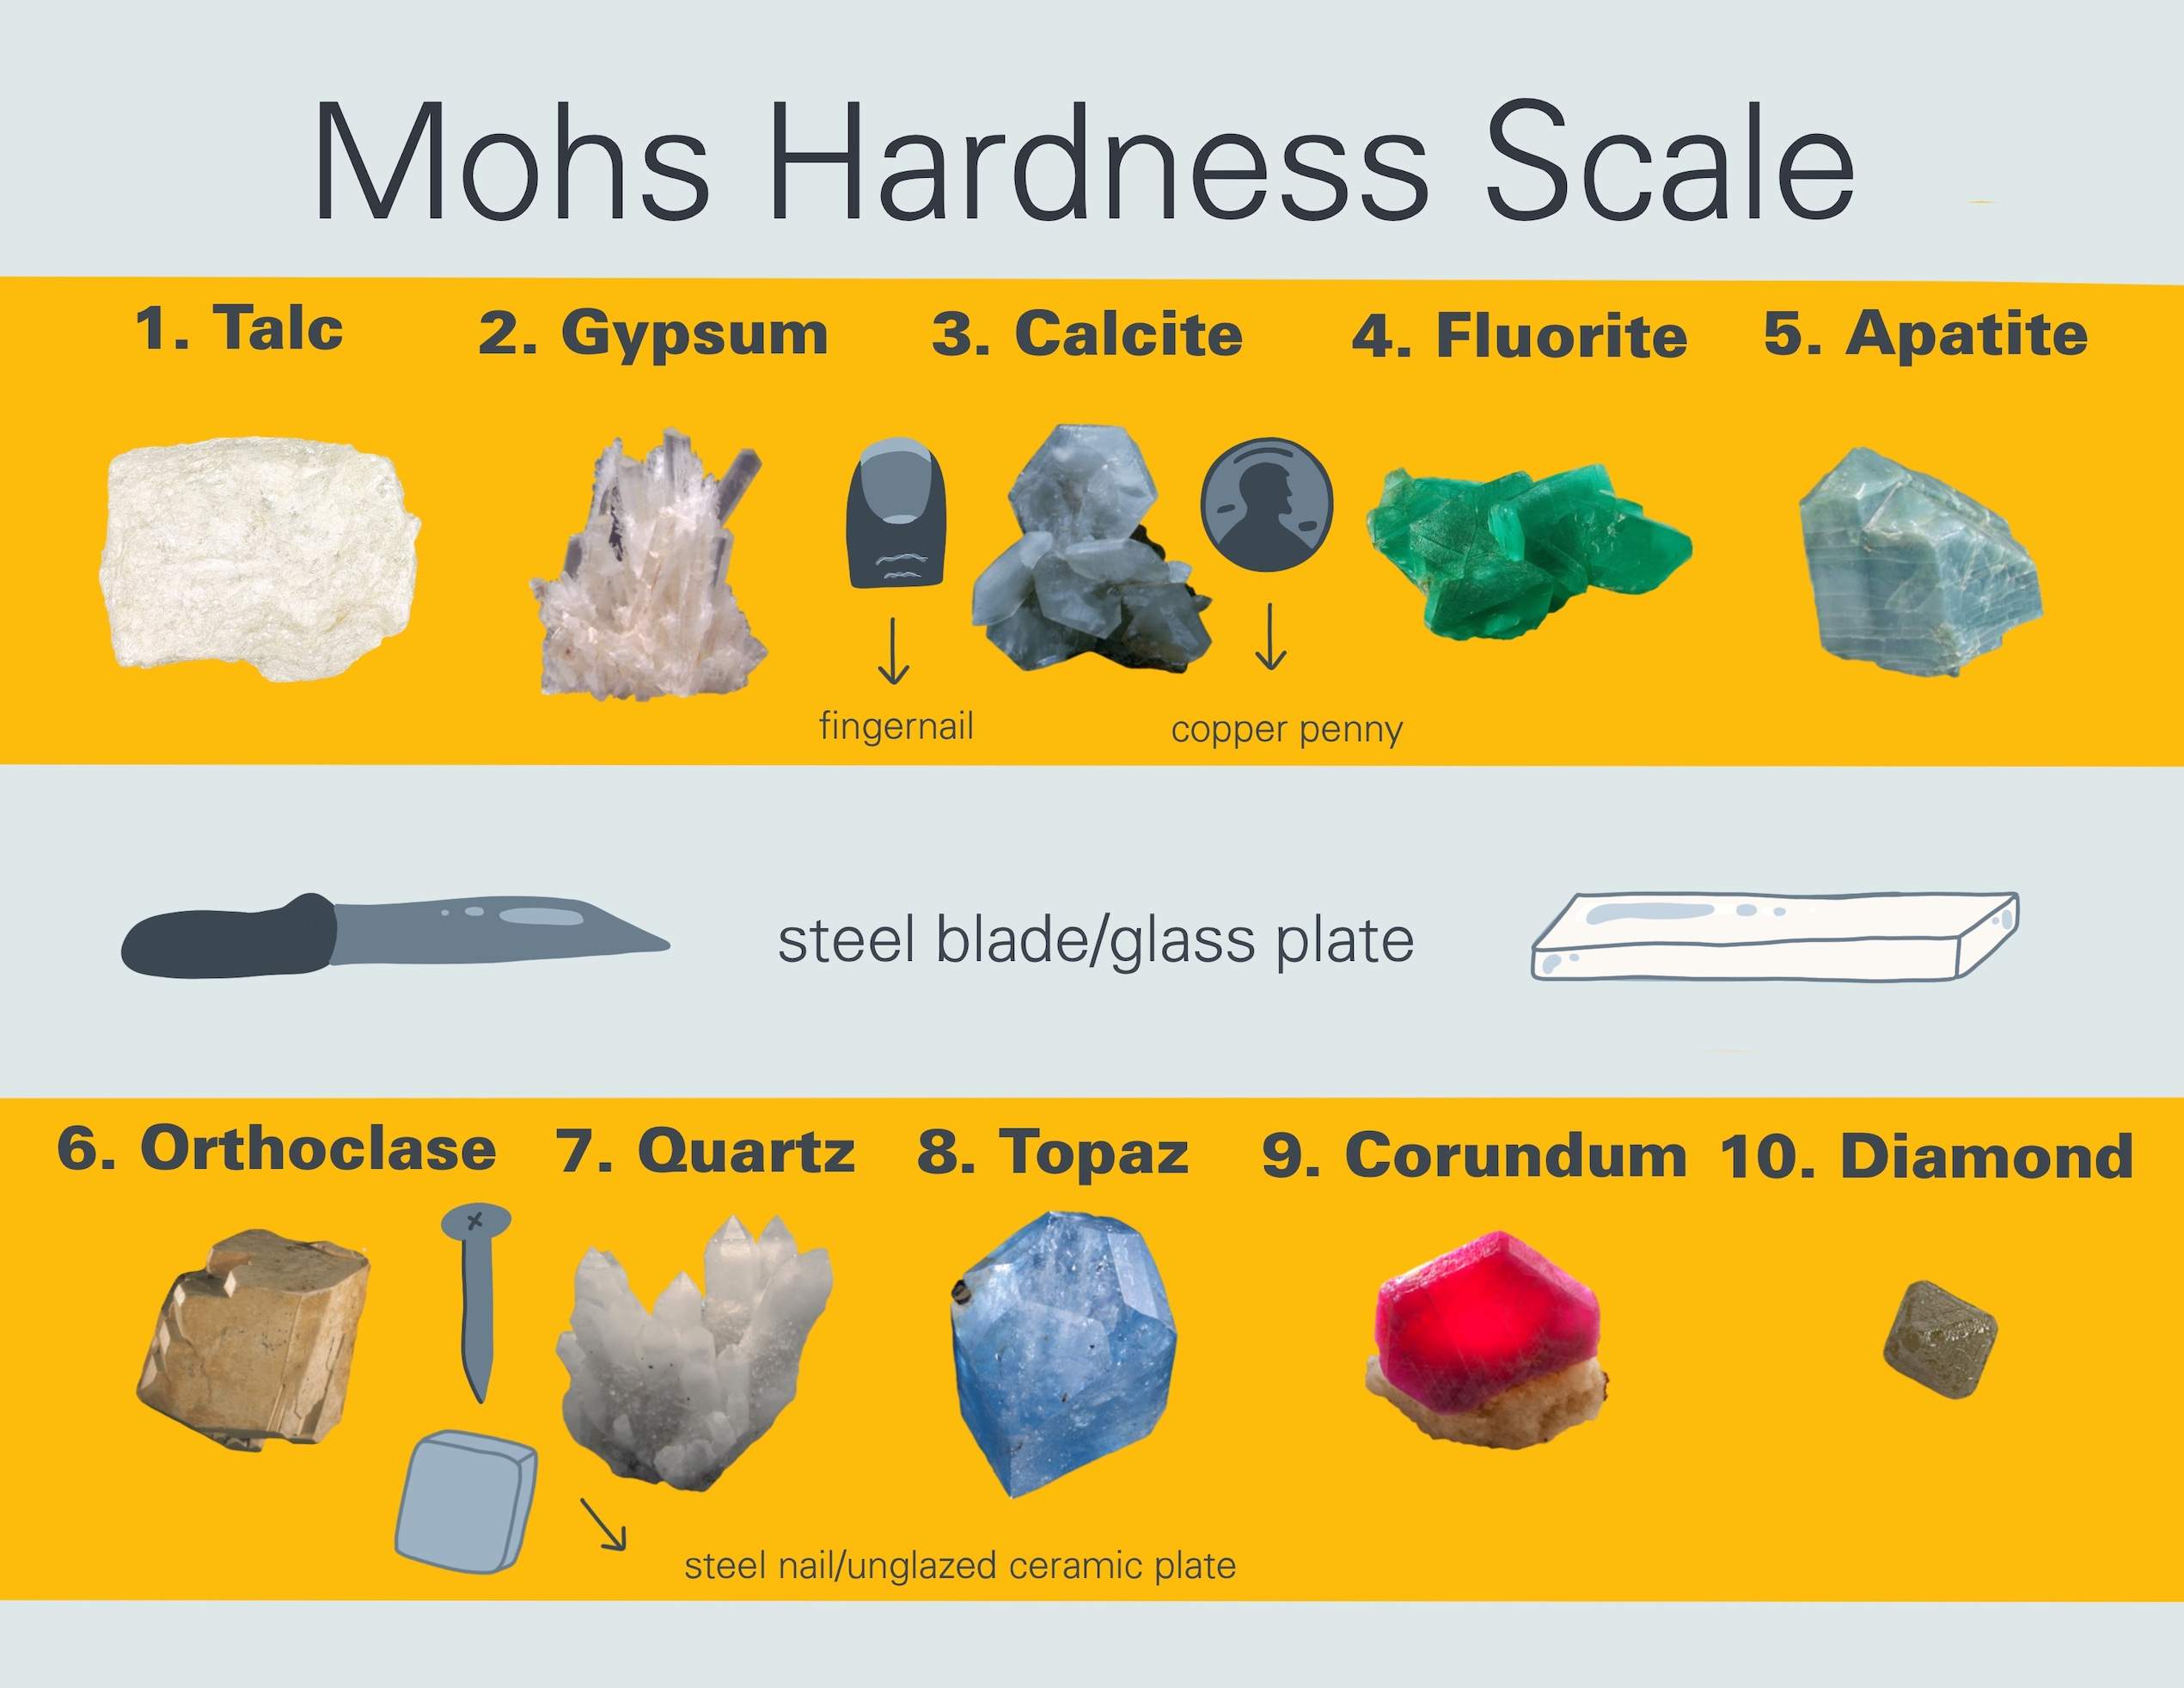 The Mohs Scale to define the hardness of minerals